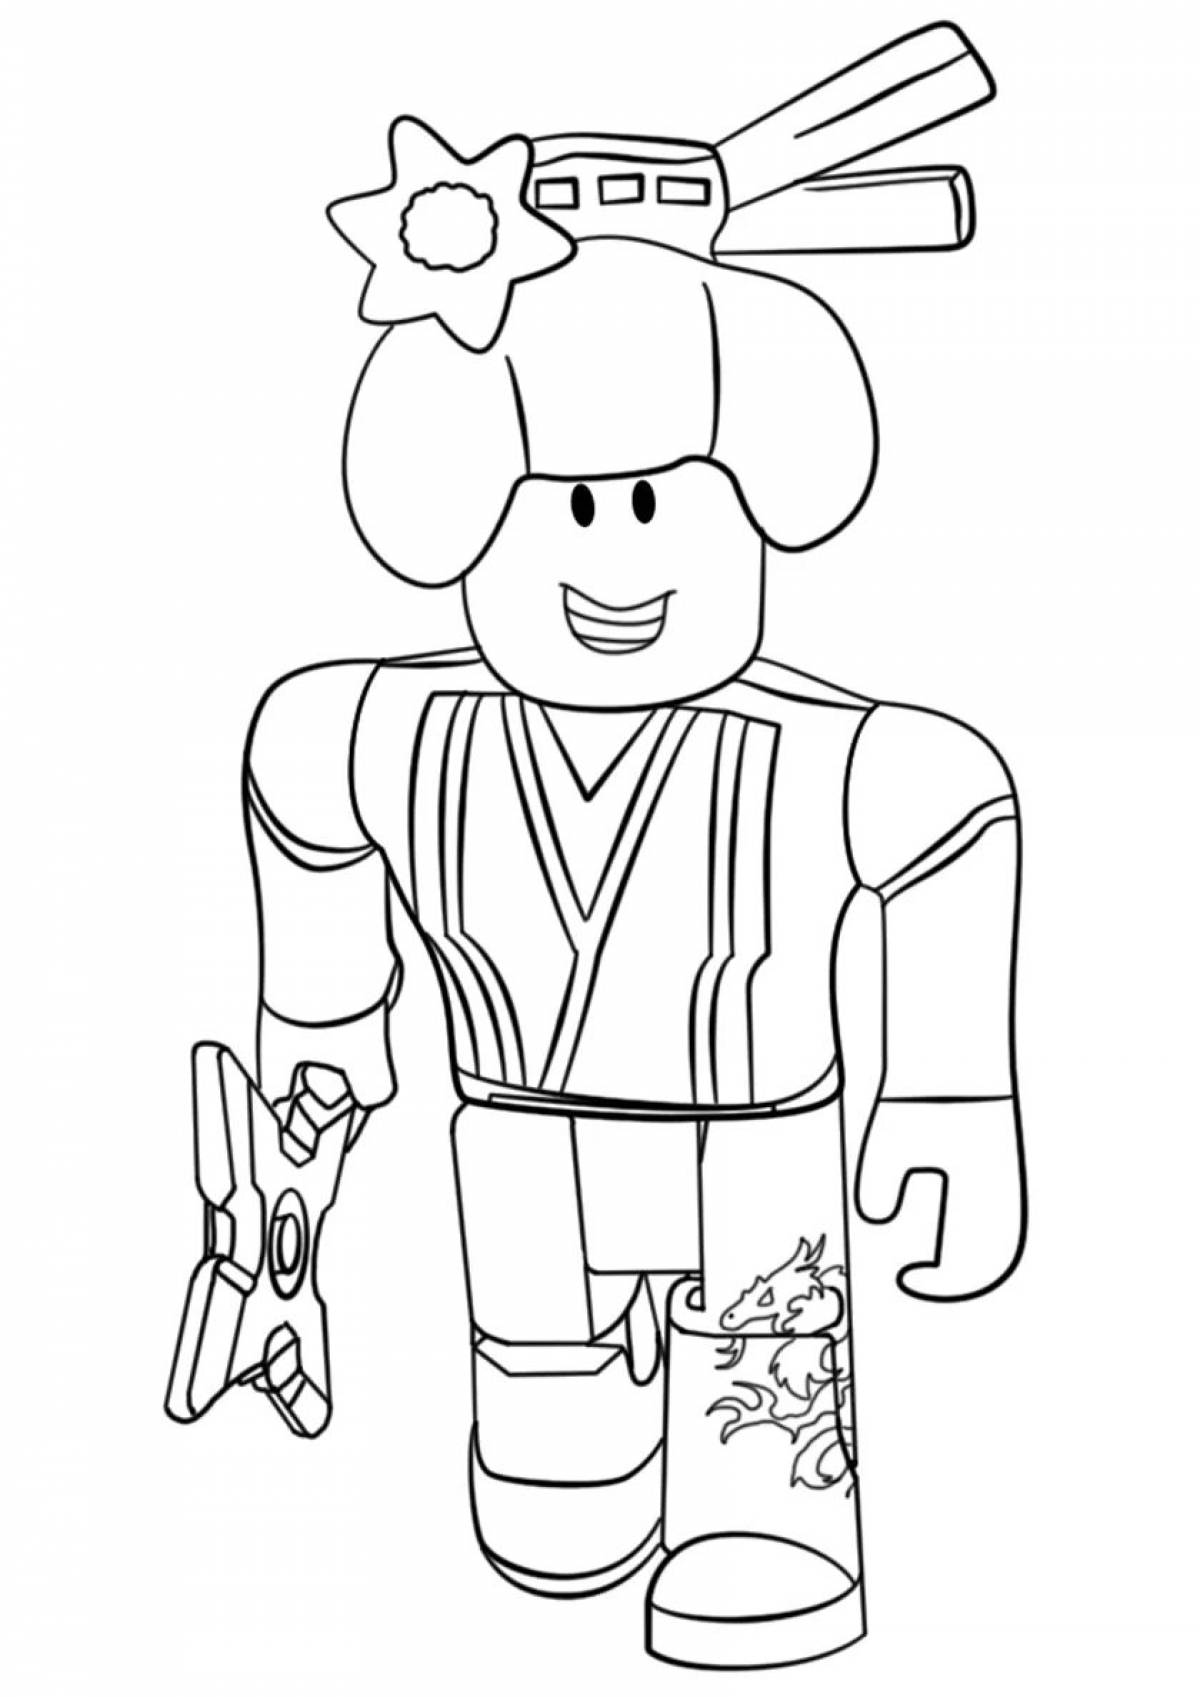 Roblox holiday donator coloring page